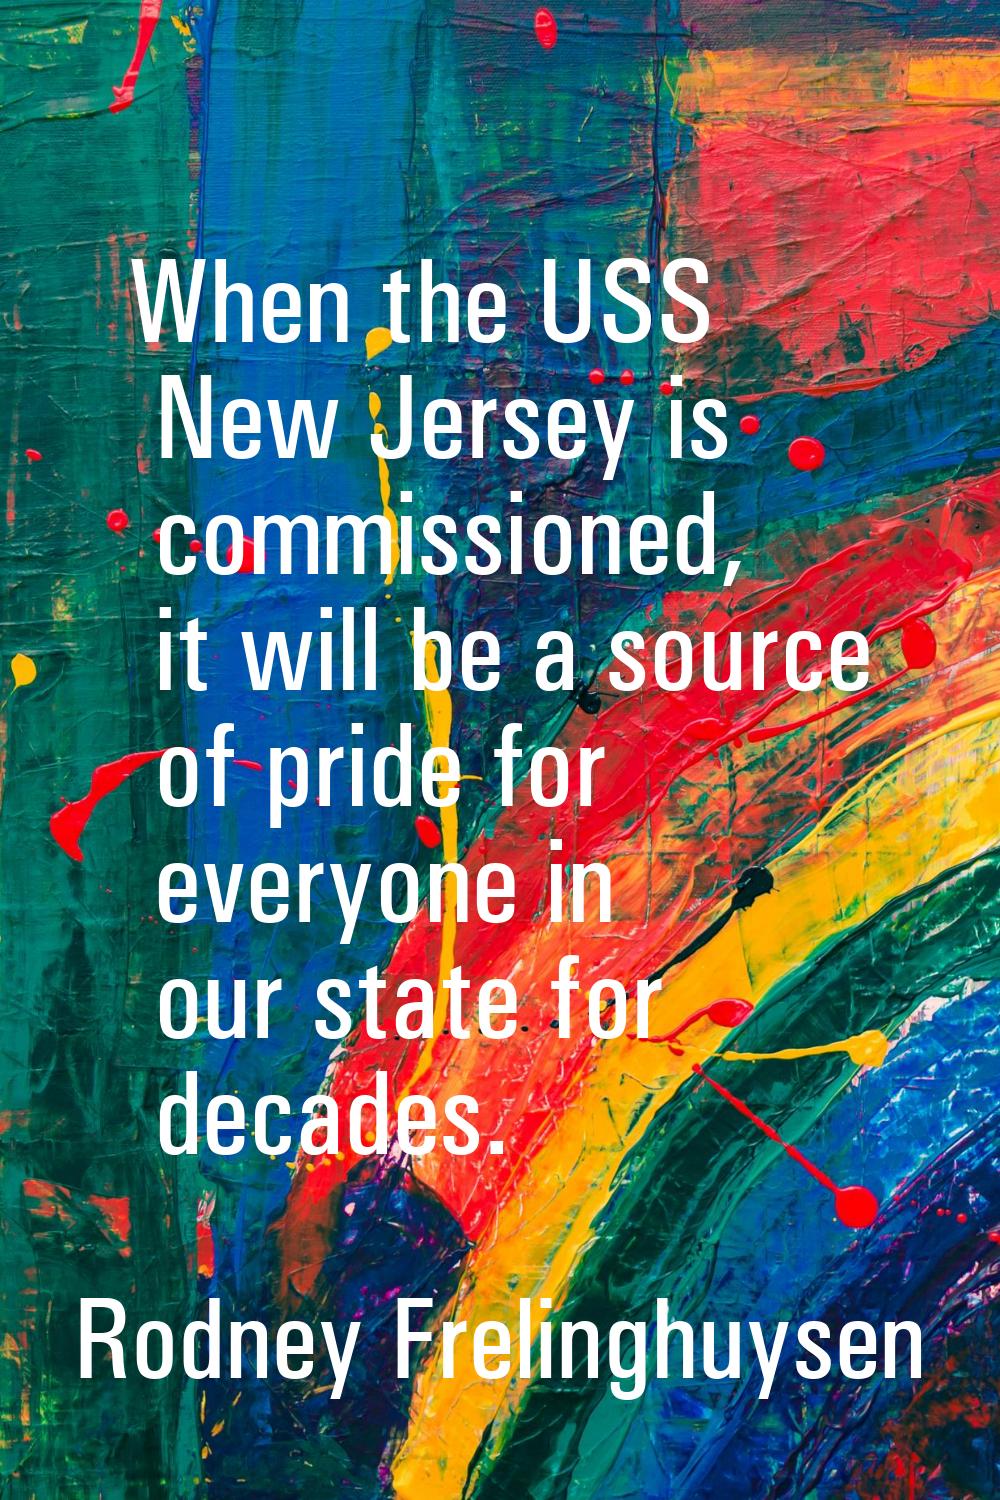 When the USS New Jersey is commissioned, it will be a source of pride for everyone in our state for